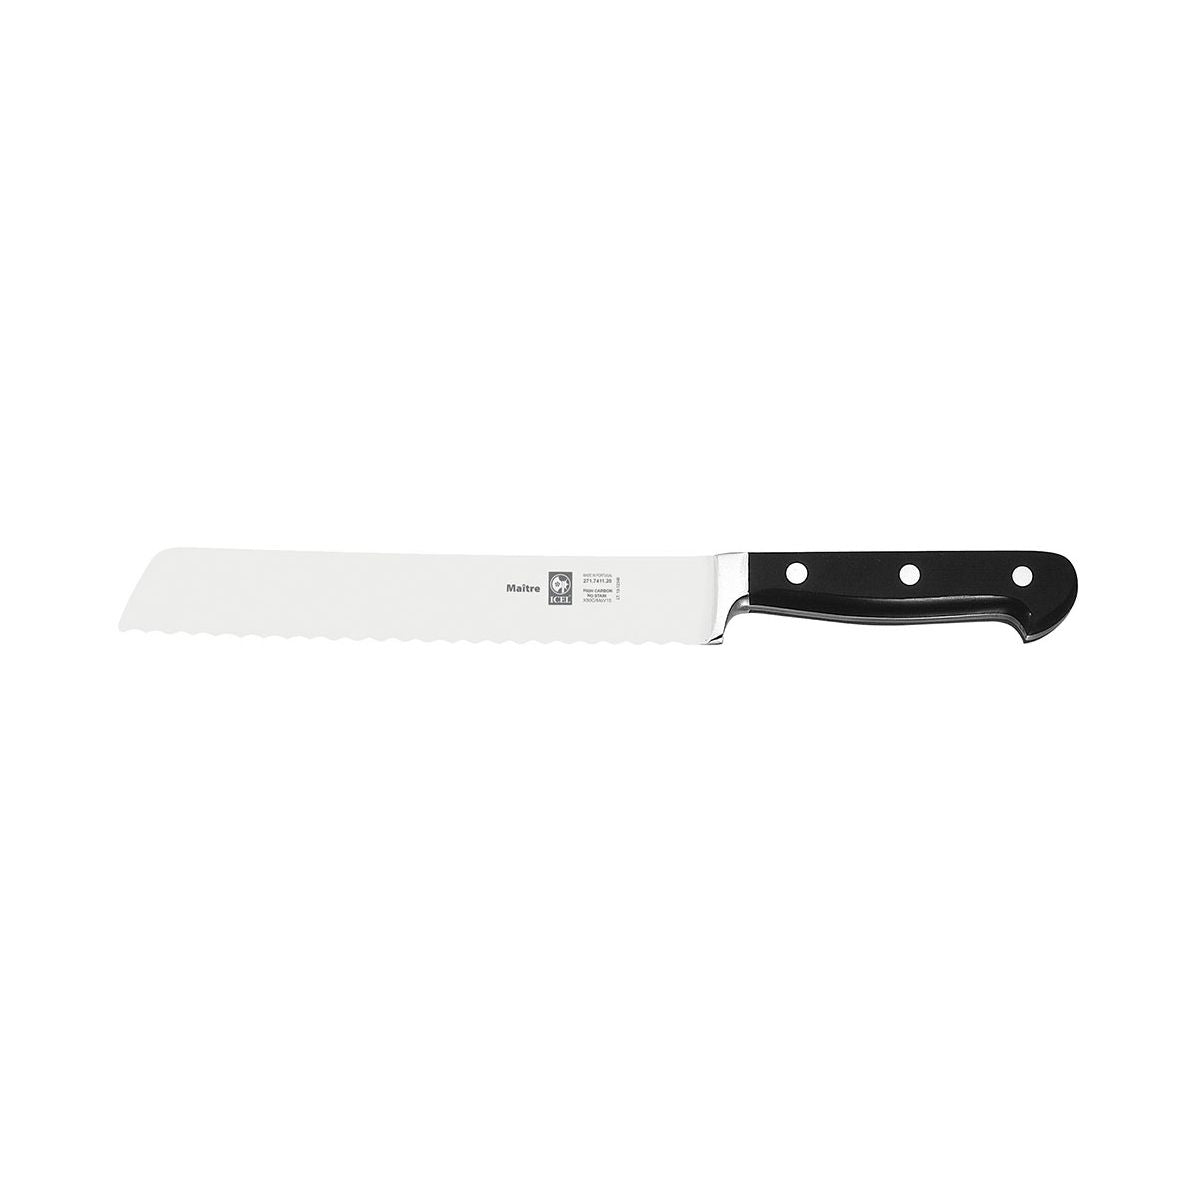 Bread Knife - 200Mm (Im7411.20) from Icel. Sold in boxes of 6. Hospitality quality at wholesale price with The Flying Fork! 